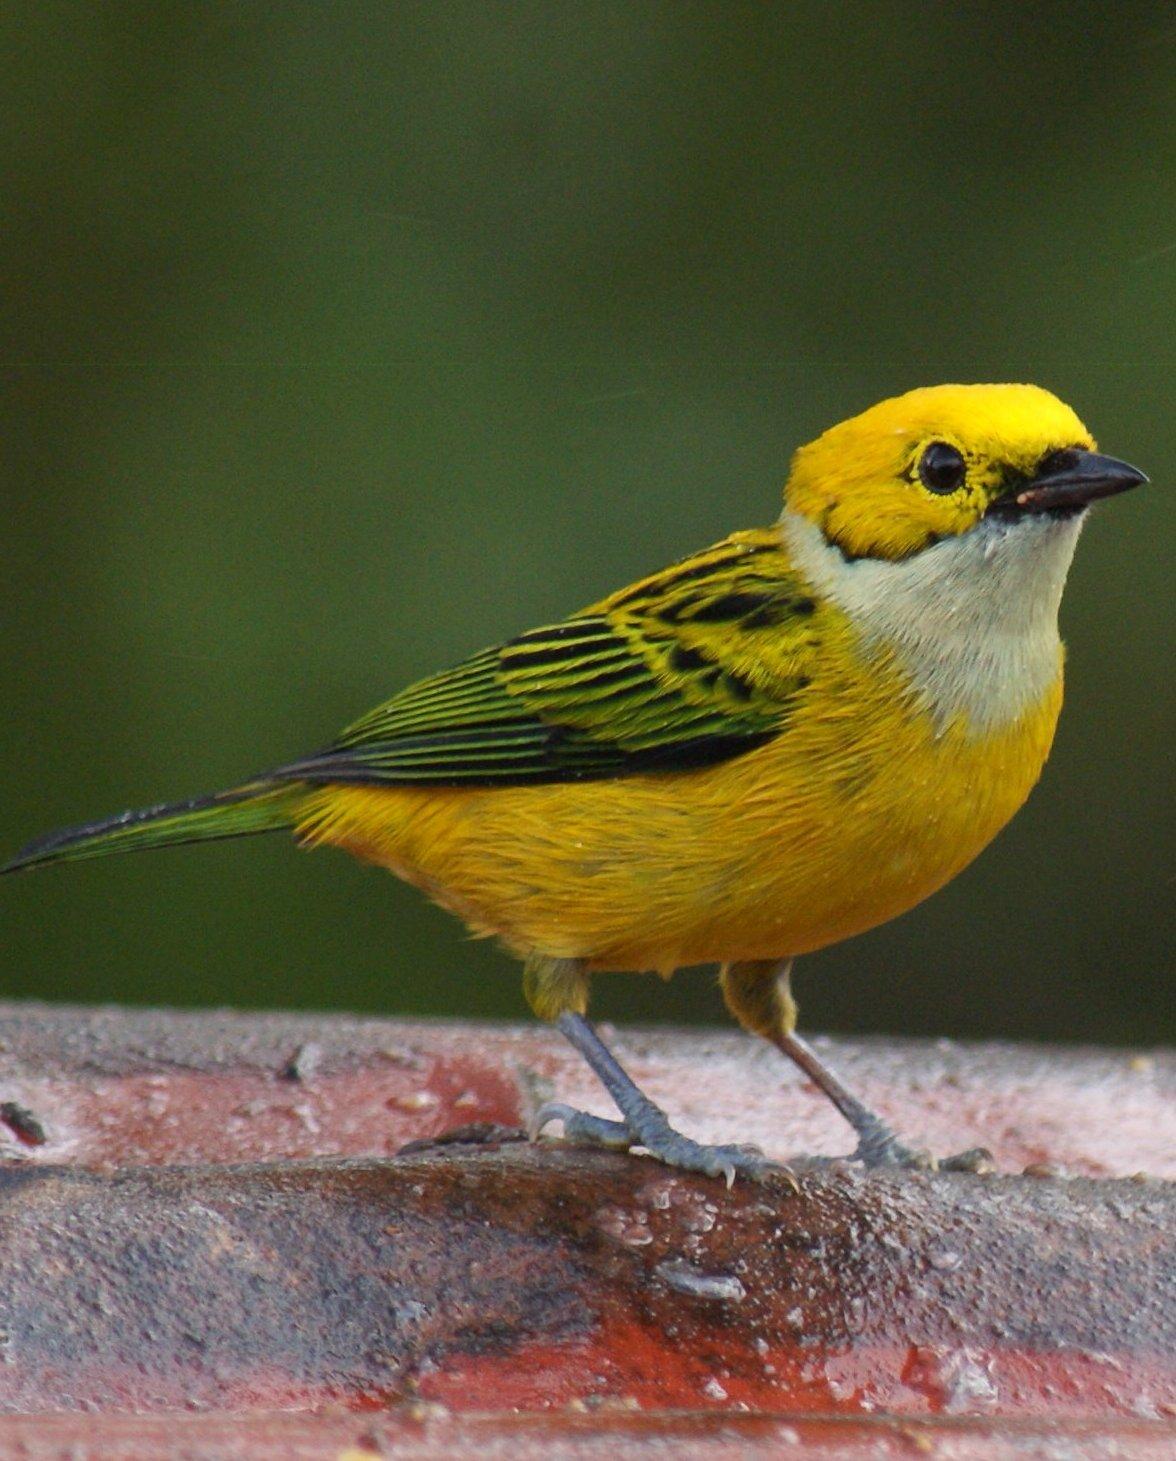 Silver-throated Tanager Photo by Robin Oxley